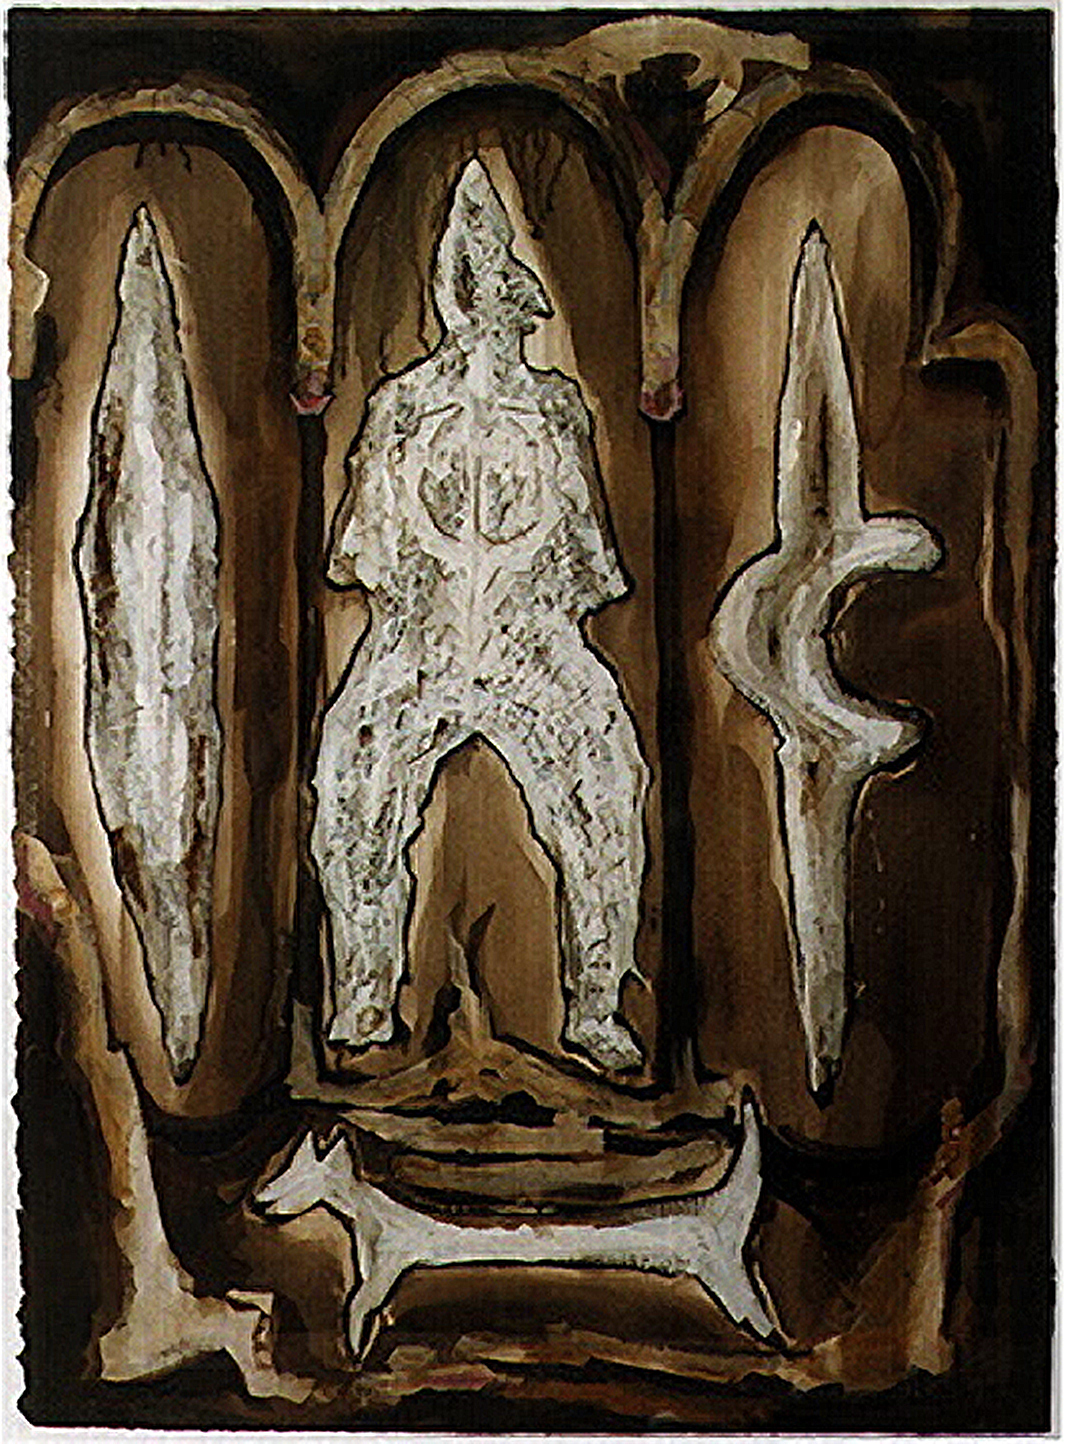 Rites of Passage Four, 1992 by Adrian Mauriks.